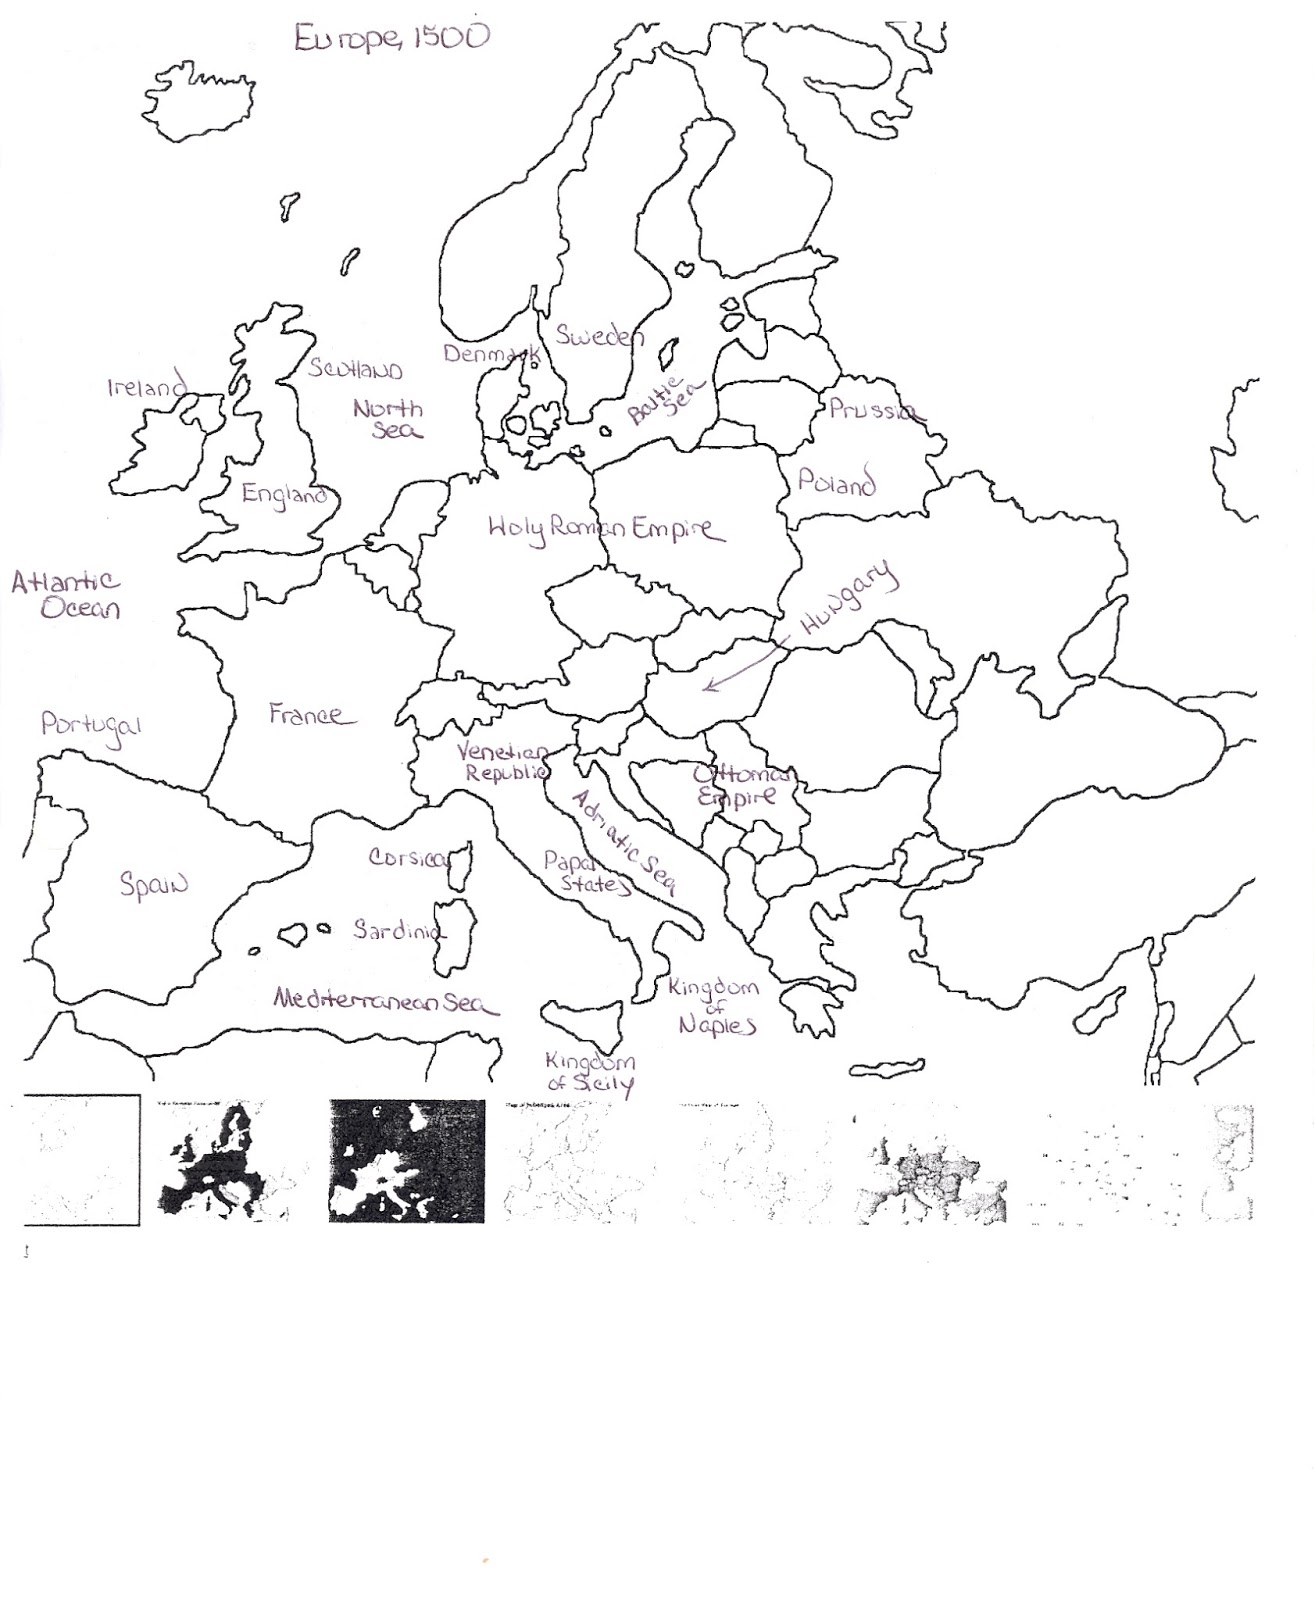 mr-e-s-world-history-page-chapter-10-medieval-kingdoms-in-europe-800-1300-new-textbook